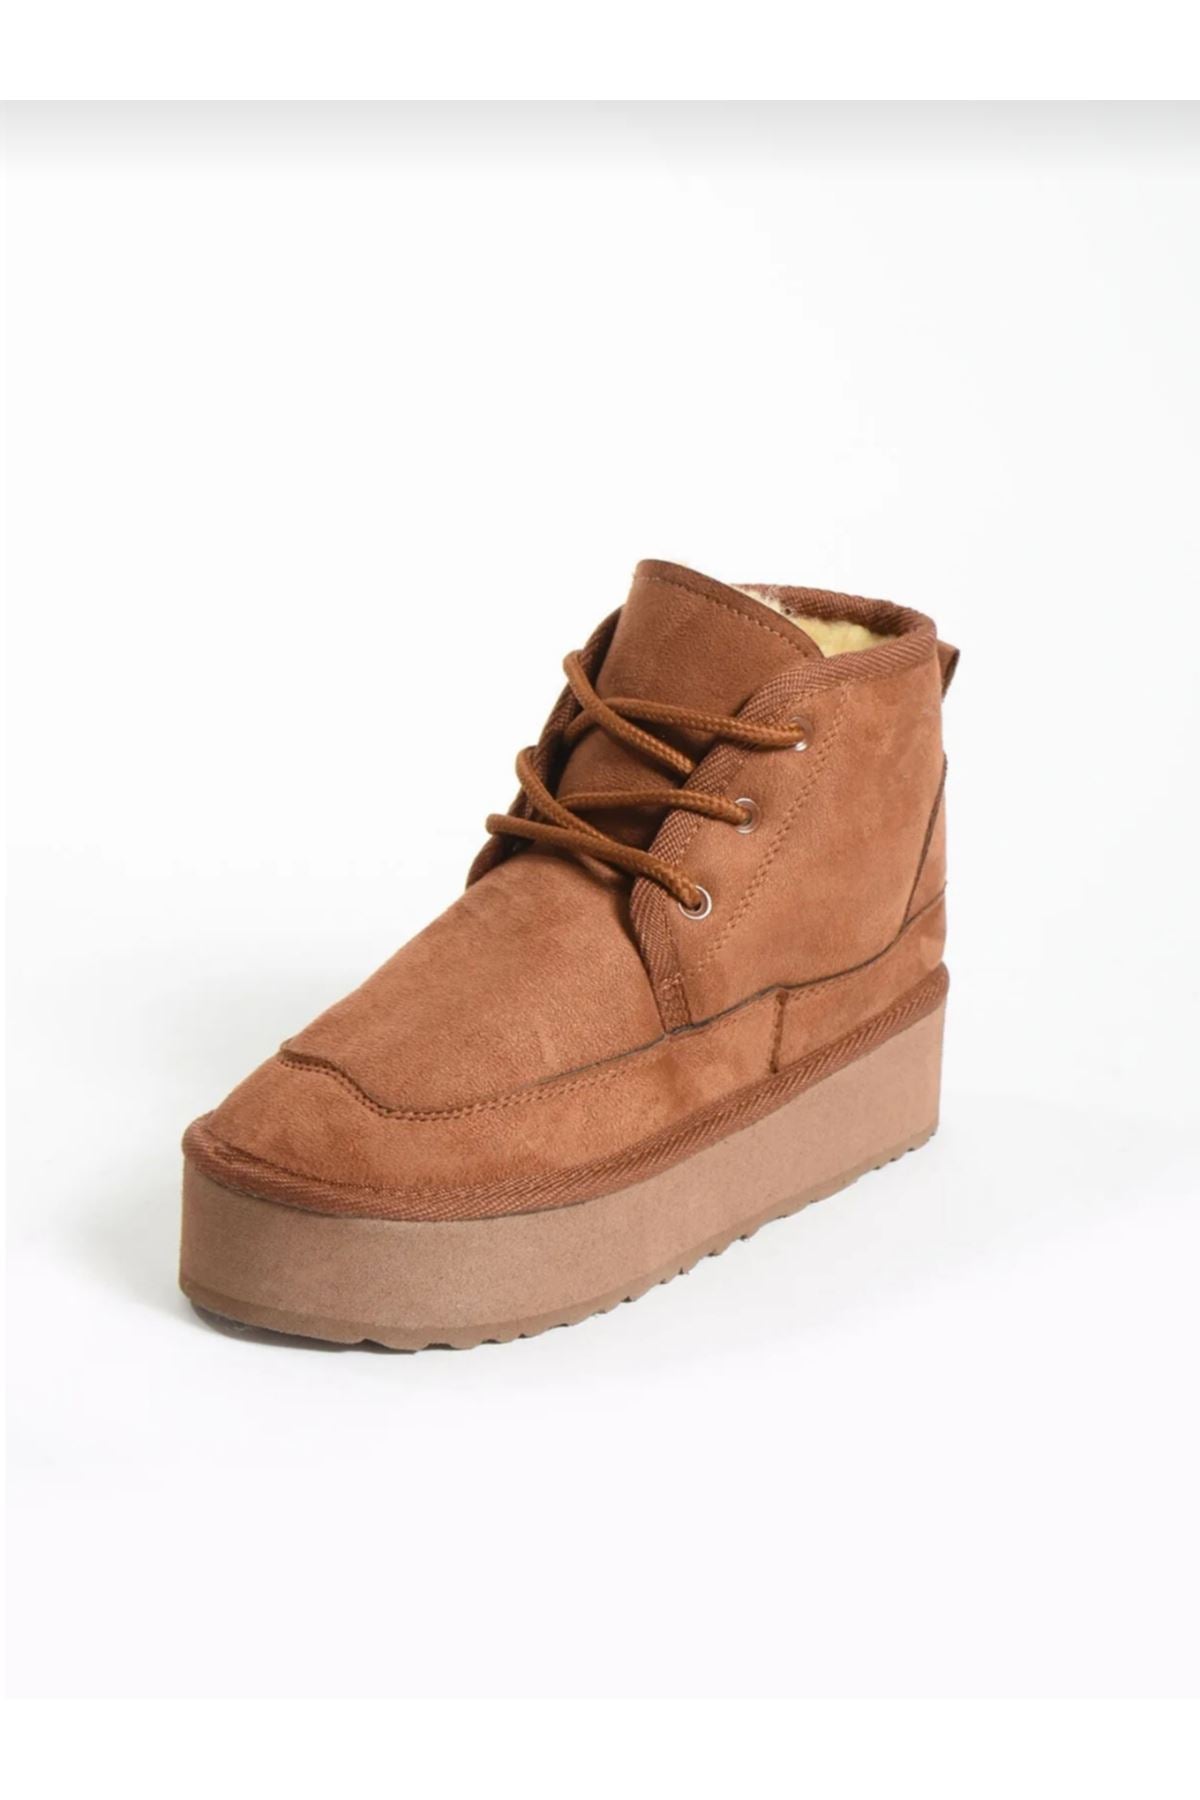 Sesil tan suede lace-up women's boots - STREETMODE ™